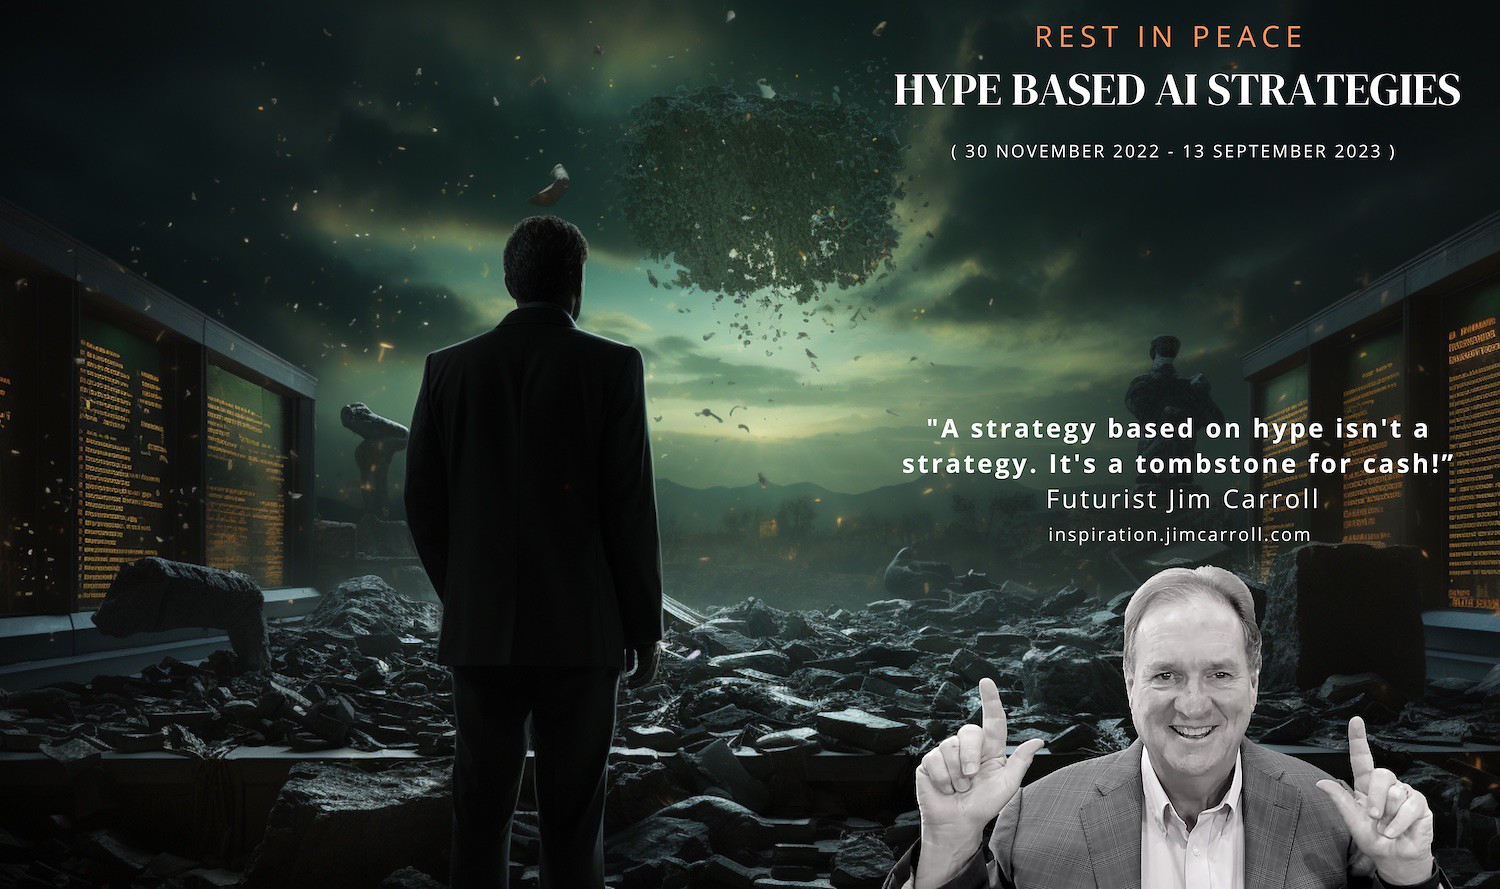 "A strategy based on hype isn't a strategy. It's a tombstone for cash"' - Futurist Jim Carroll